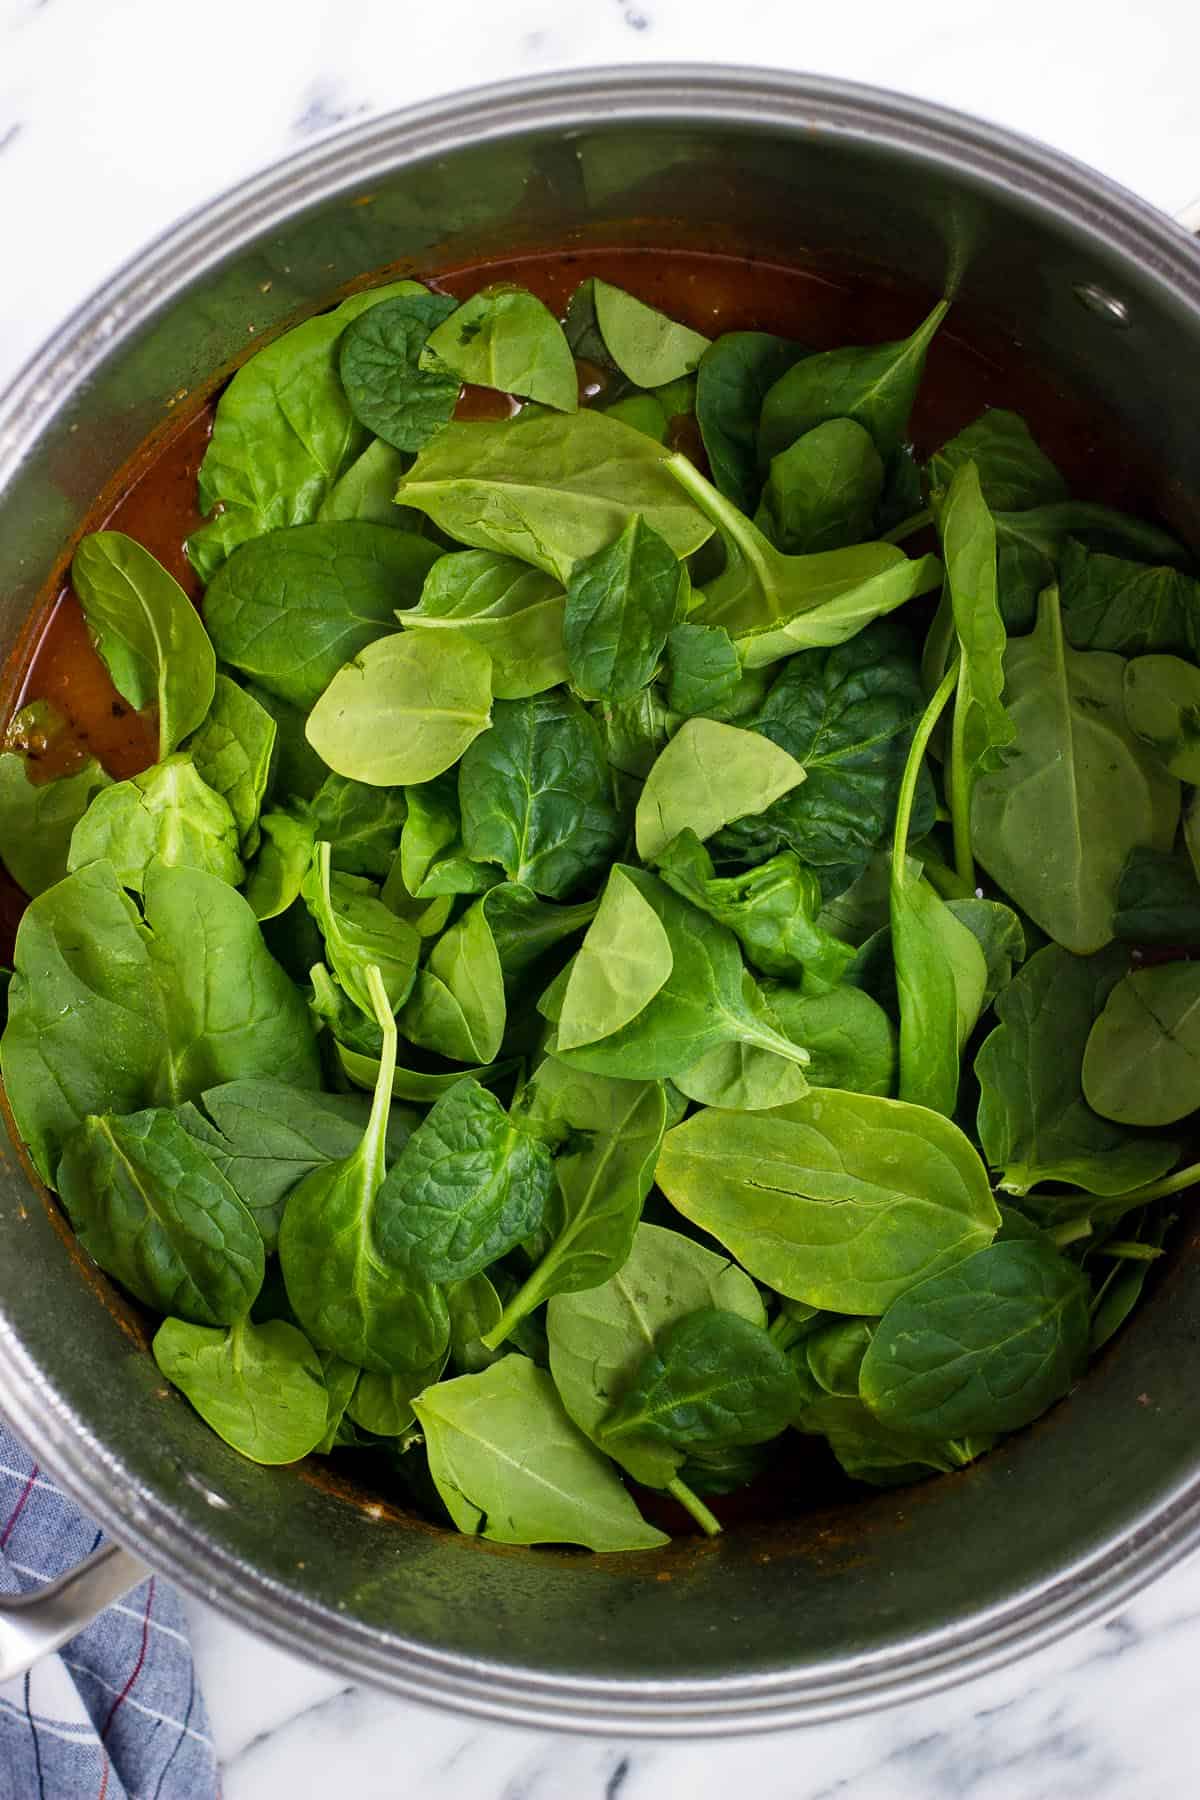 Spinach added to the pot of soup.